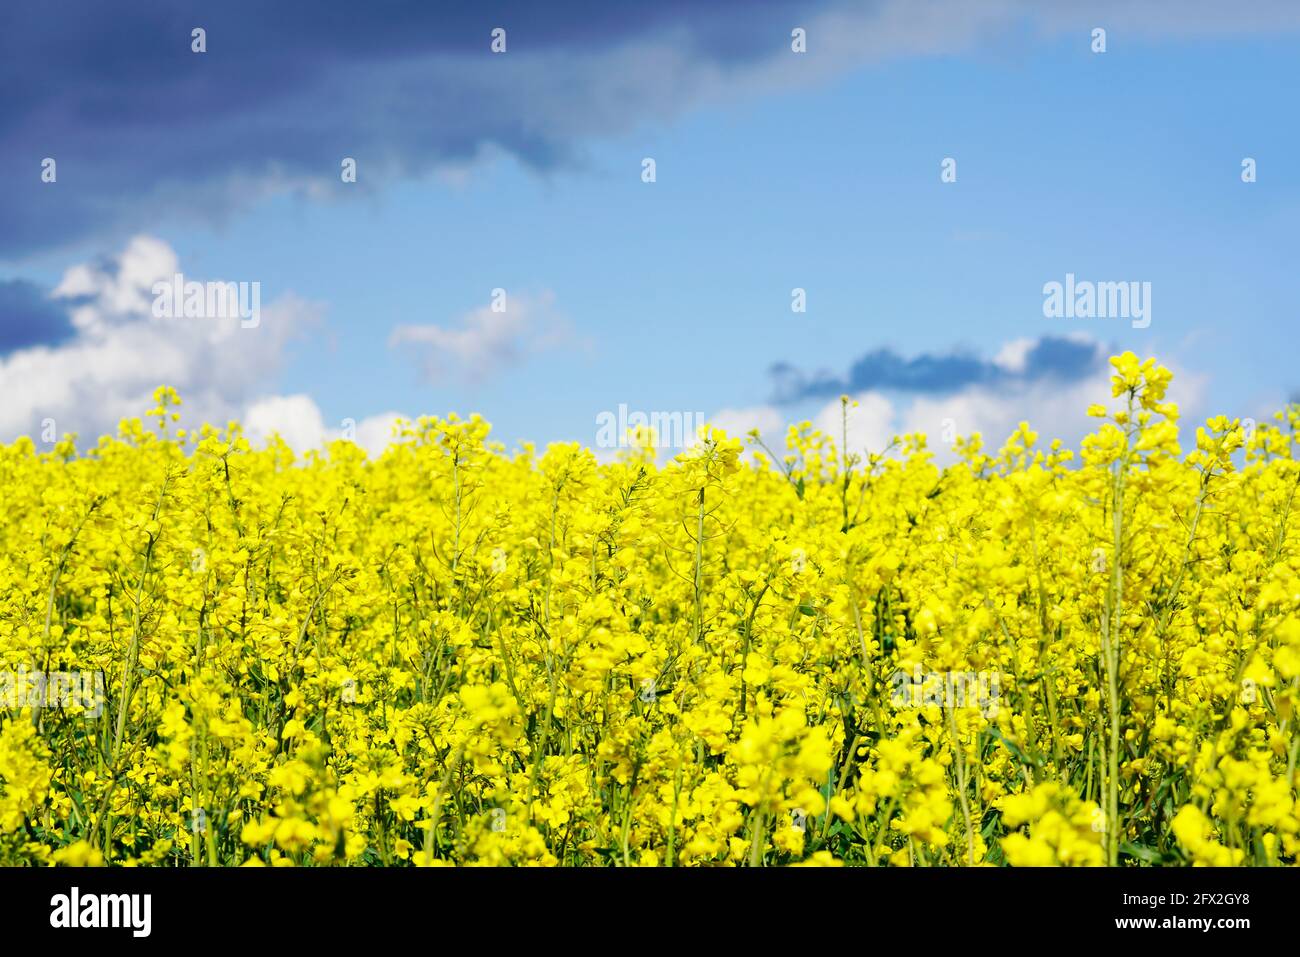 Yellow rapeseed field with gathering storm clouds in the background. Useful plant in agriculture. Brassica napus. Yellow flowers in a field. Stock Photo